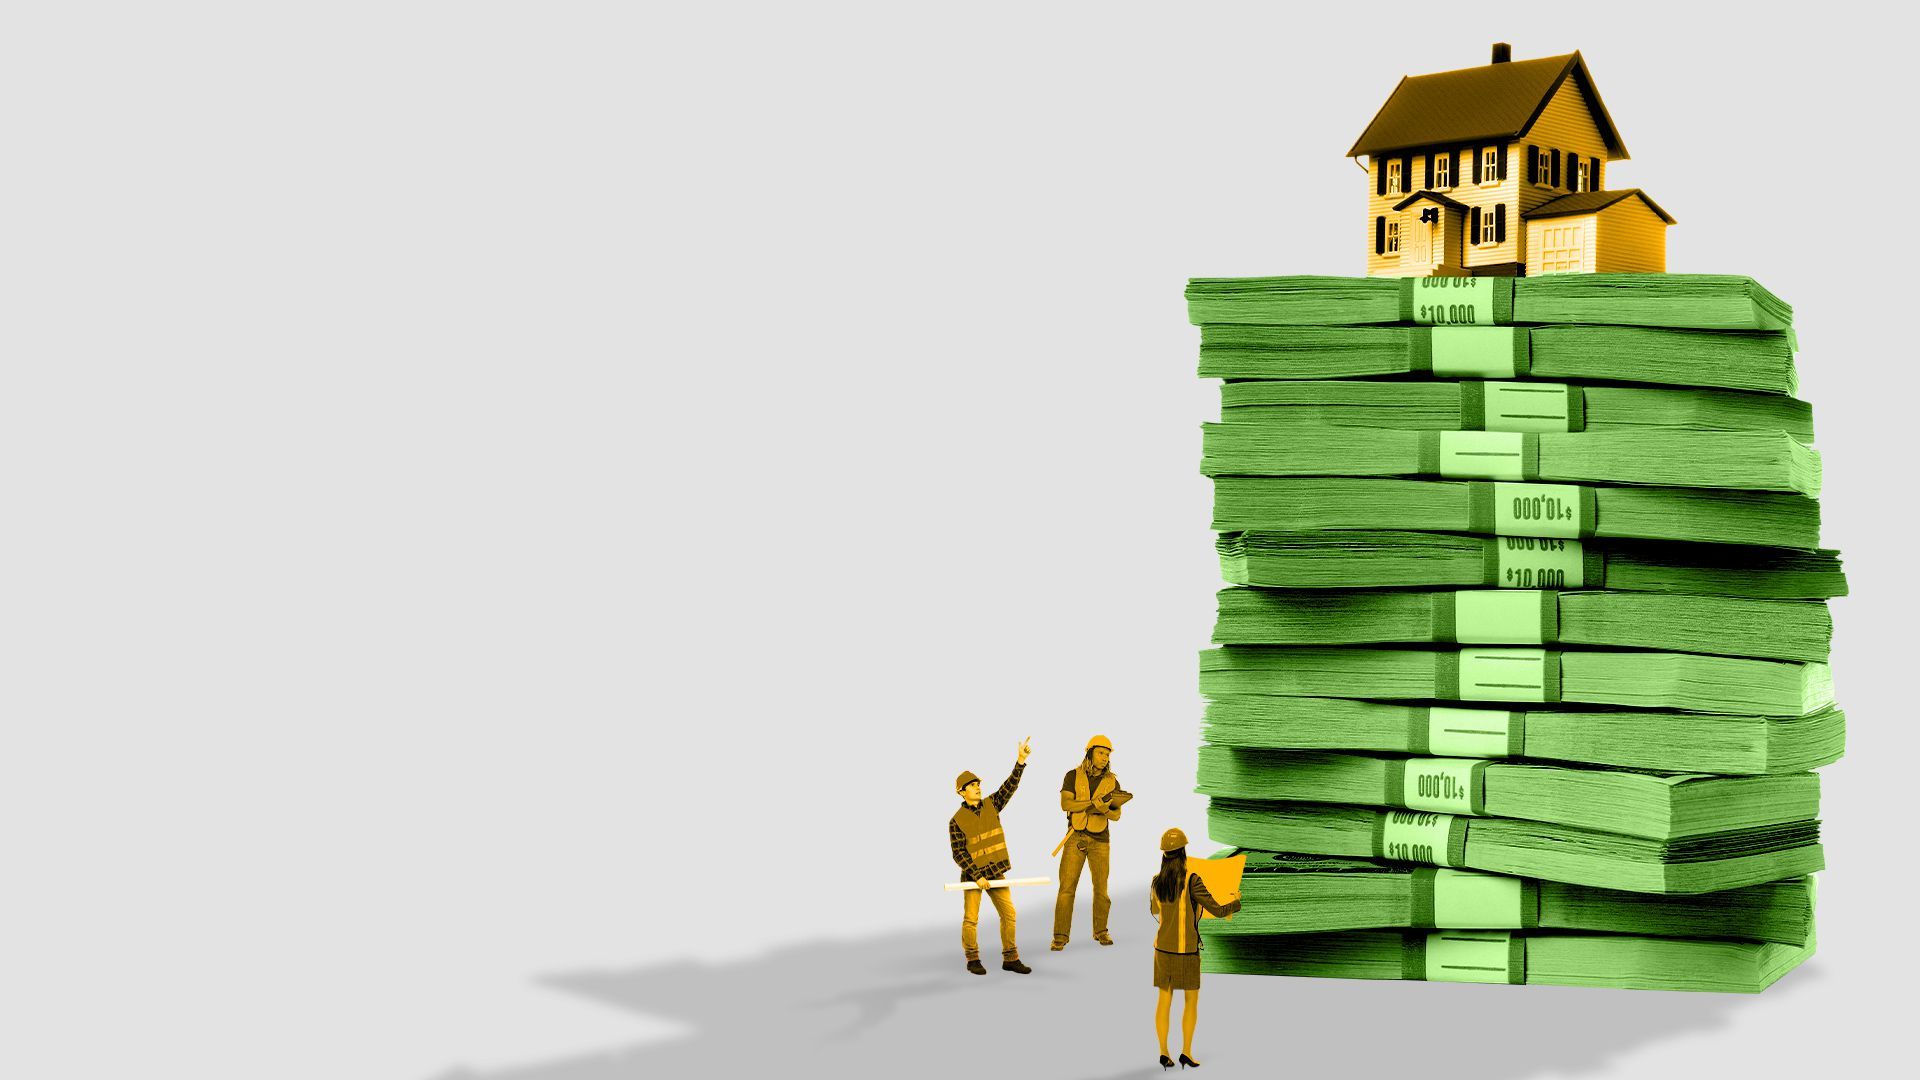 Construction workers surrounding house on top of pile of money